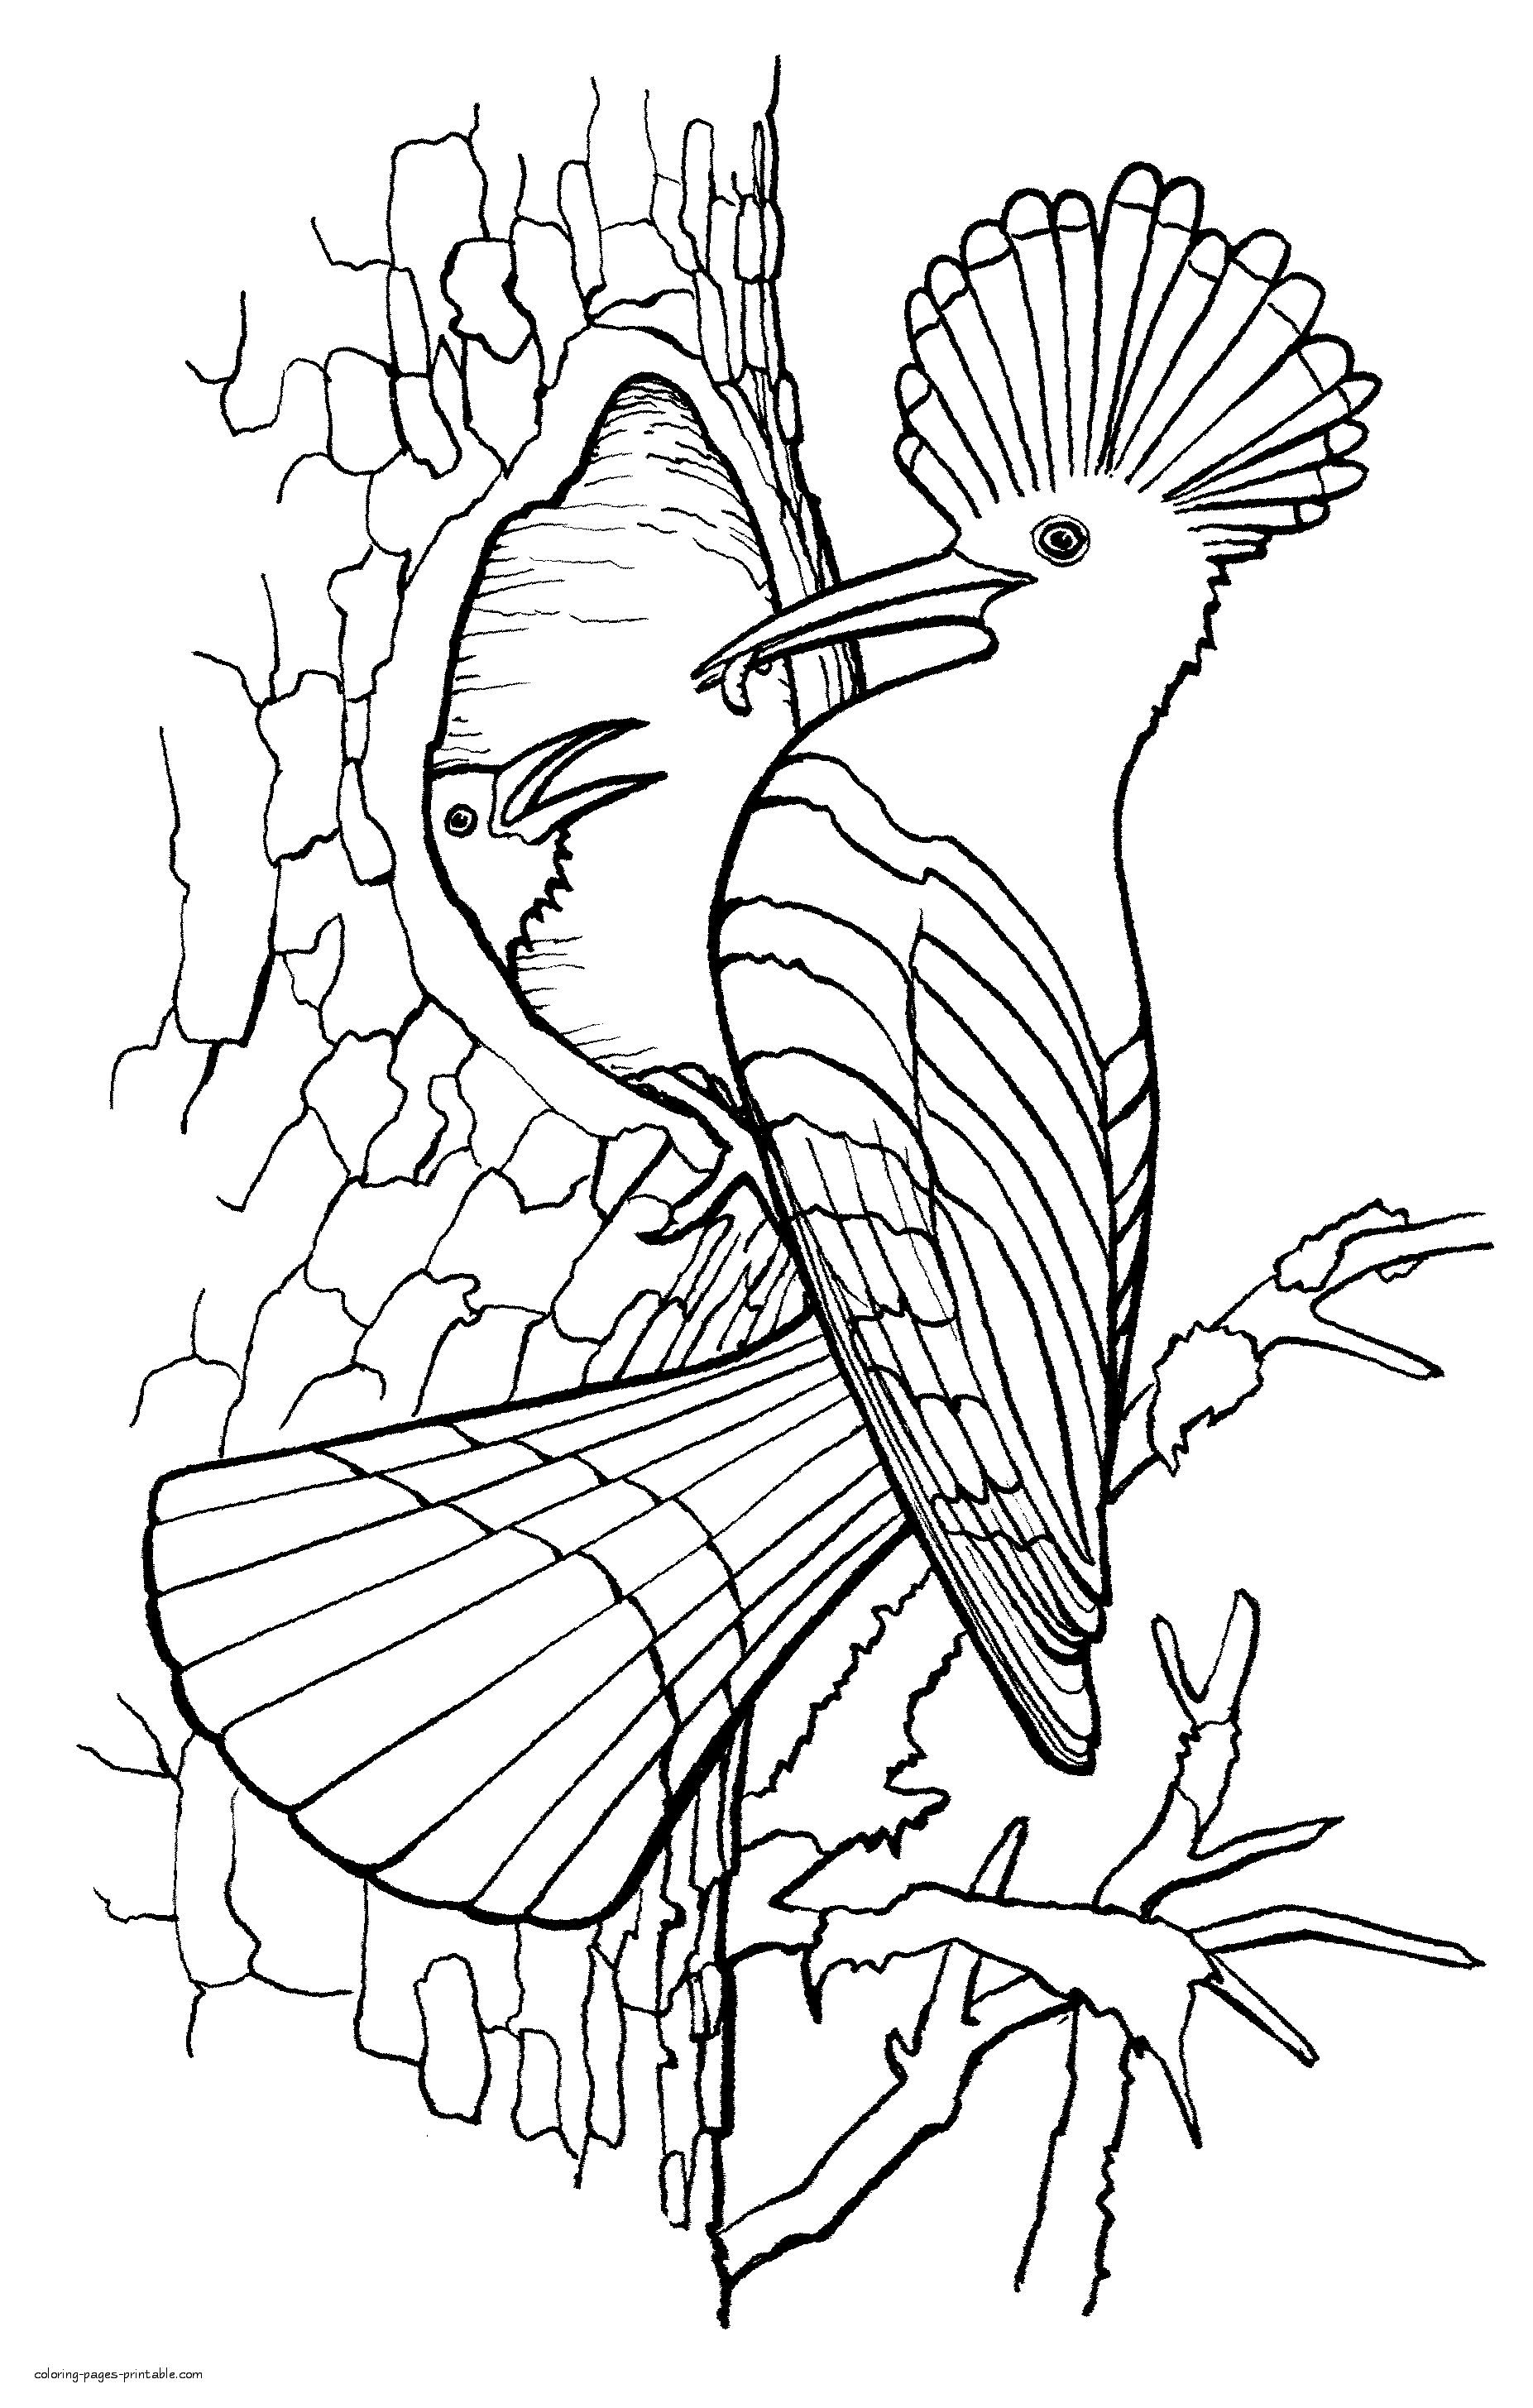 coloring-pages-of-birds-for-adults-hoopoe-coloring-pages-printable-com